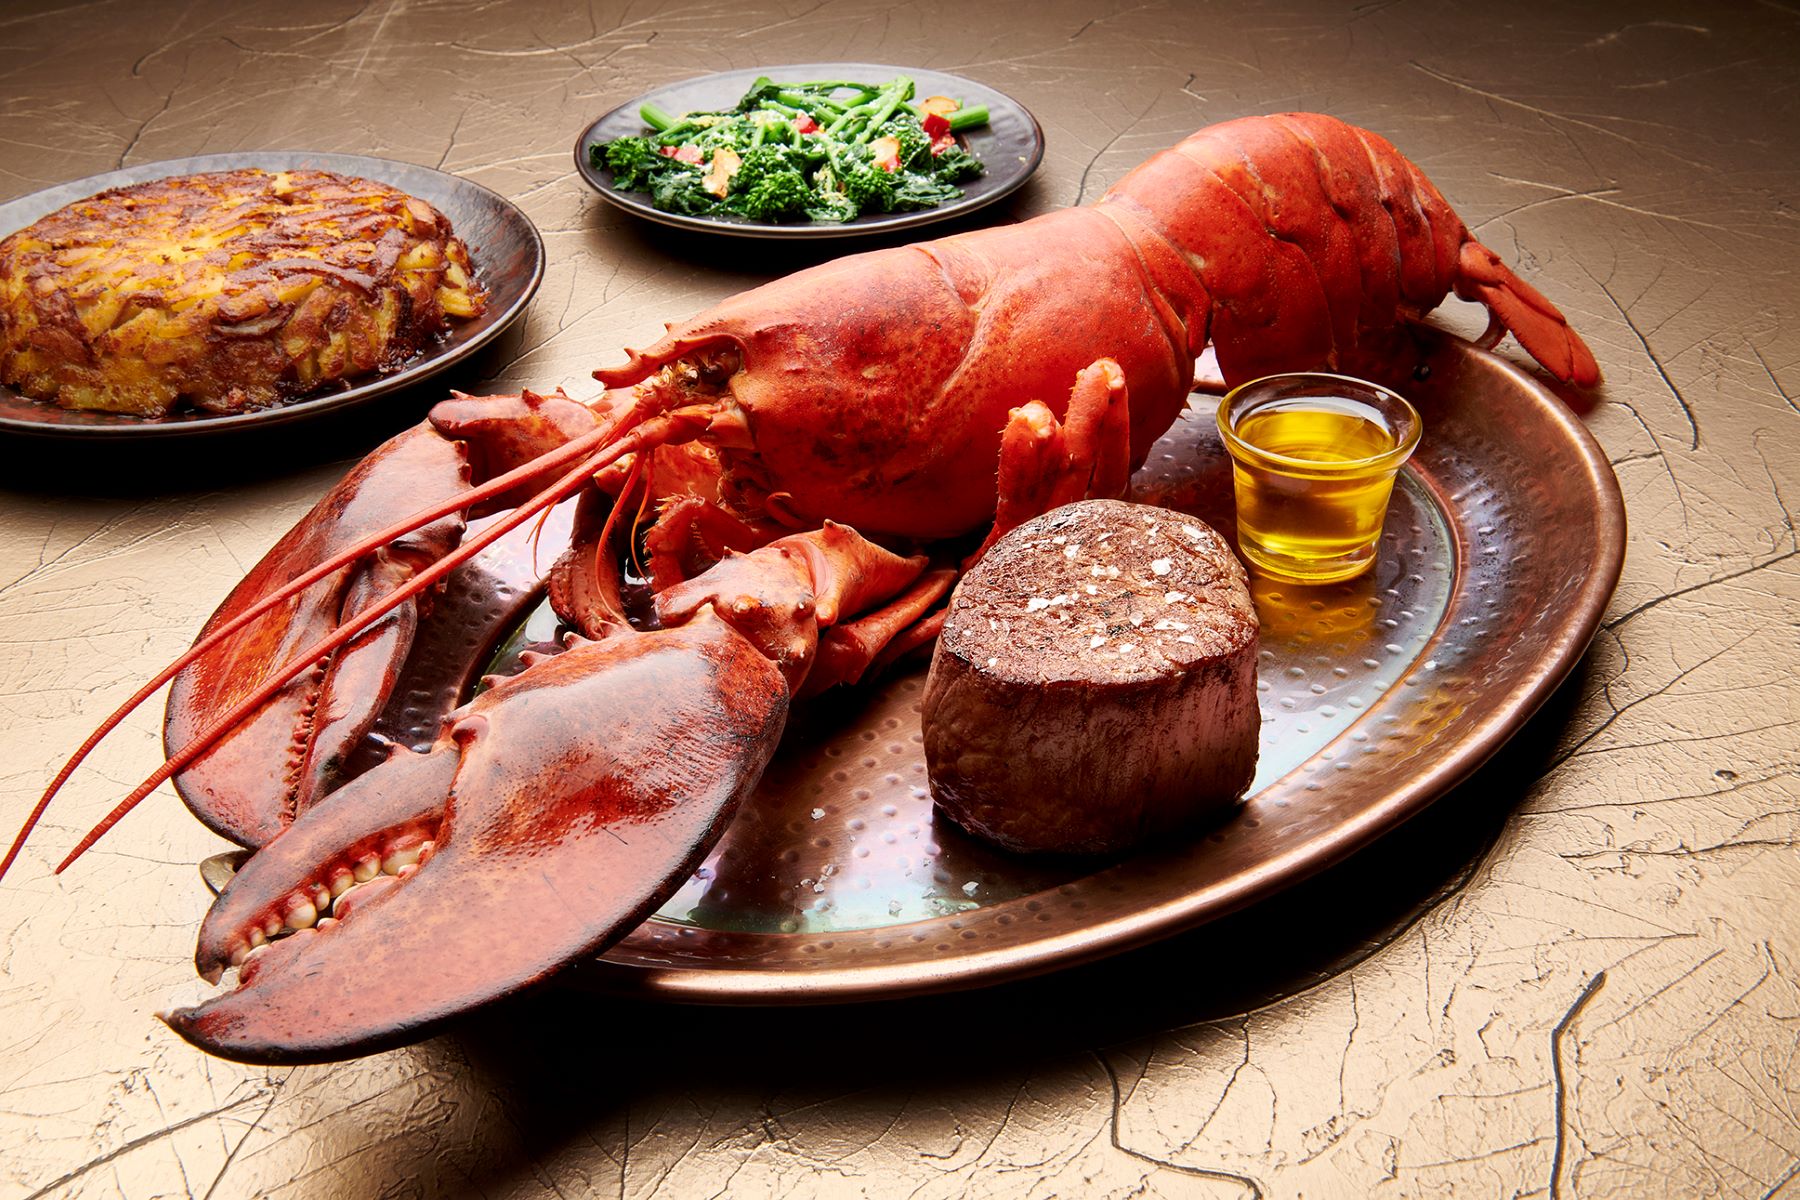 An image of the Palm's  Jumbo Nova Scotia Lobster with a special three-course dinner.